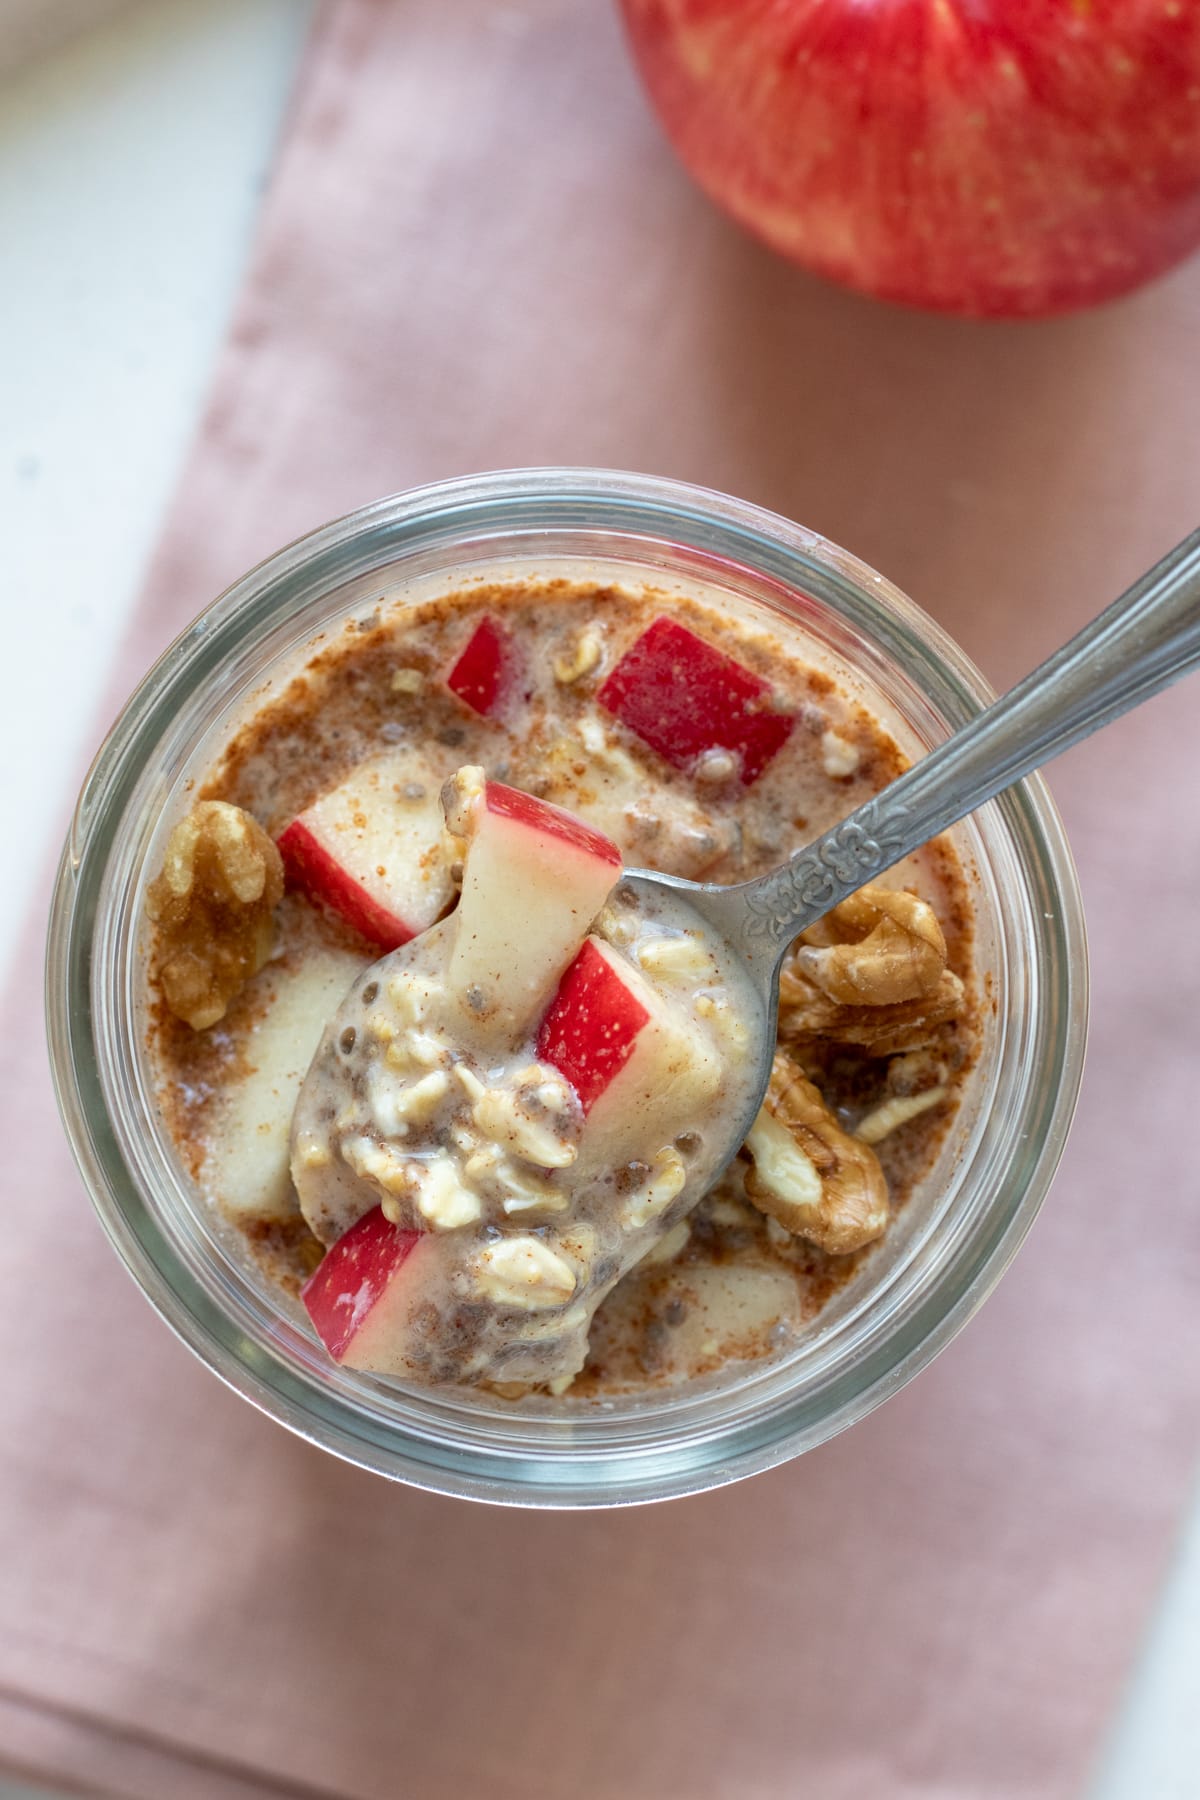 creamy overnight oats with chia seeds and crisp apple.